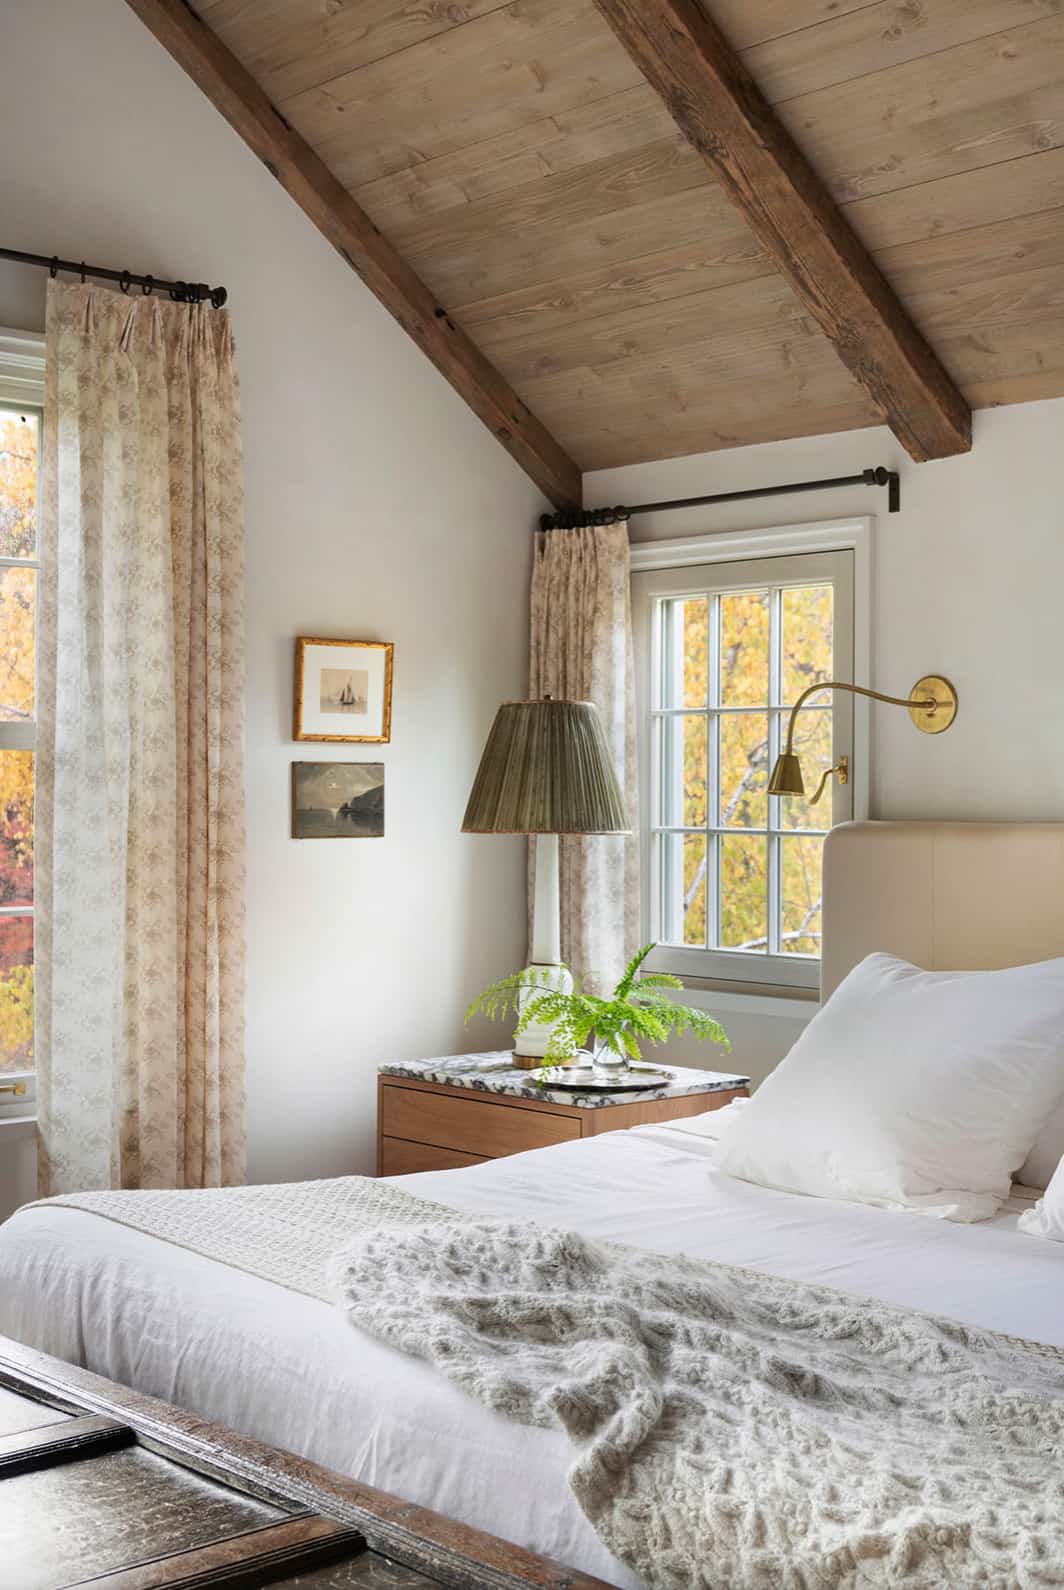 European Cottage Interiors - neutral bedroom with vaulted ceiling